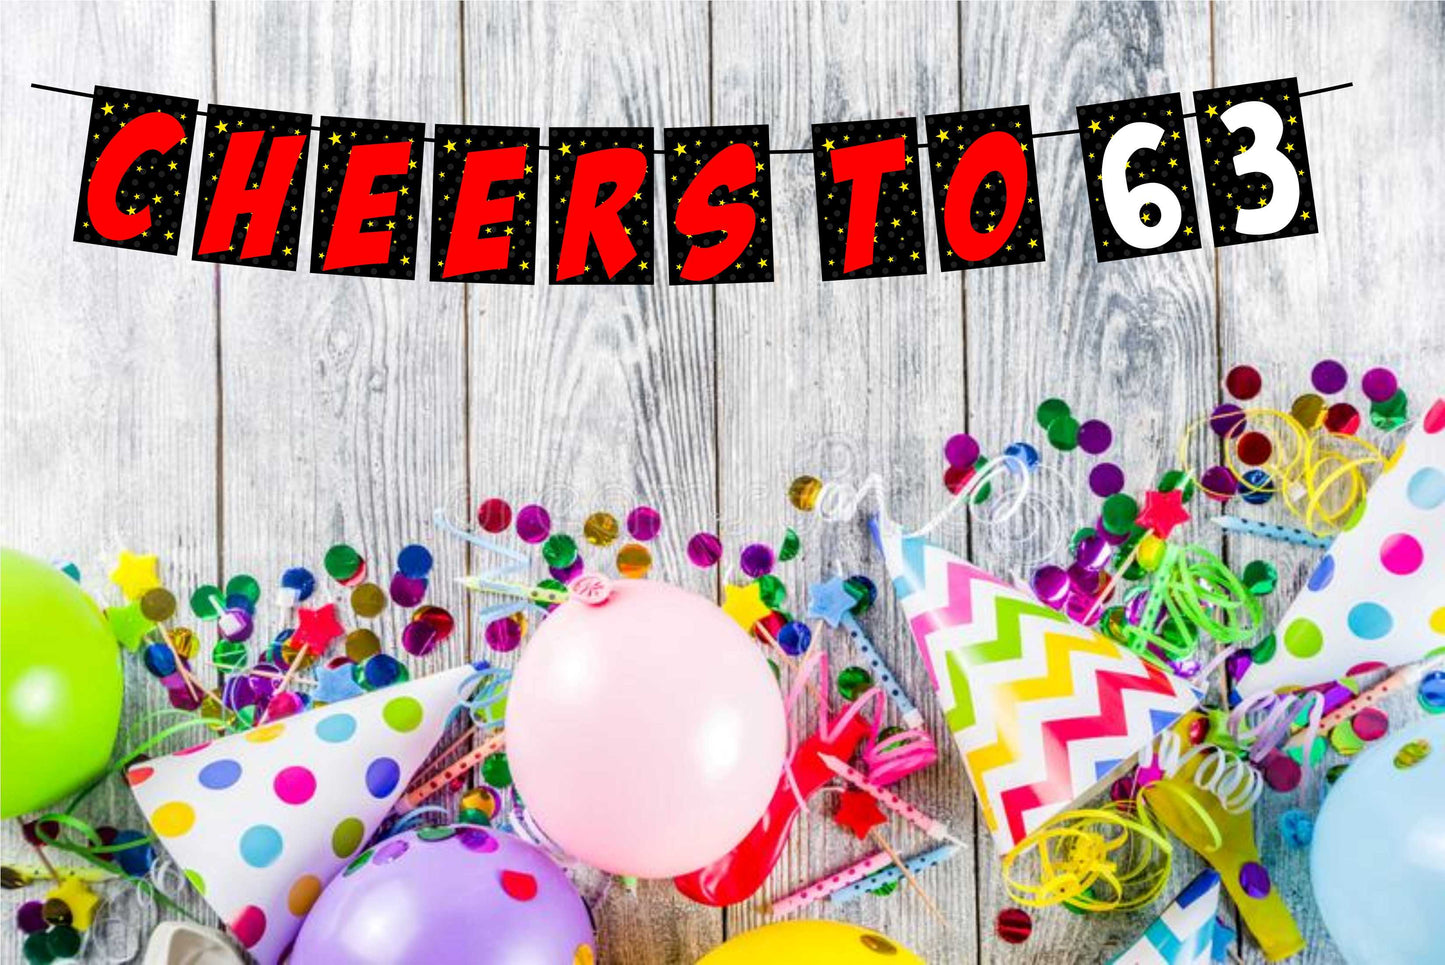 Cheers to 63 Birthday Banner for Photo Shoot Backdrop and Theme Party